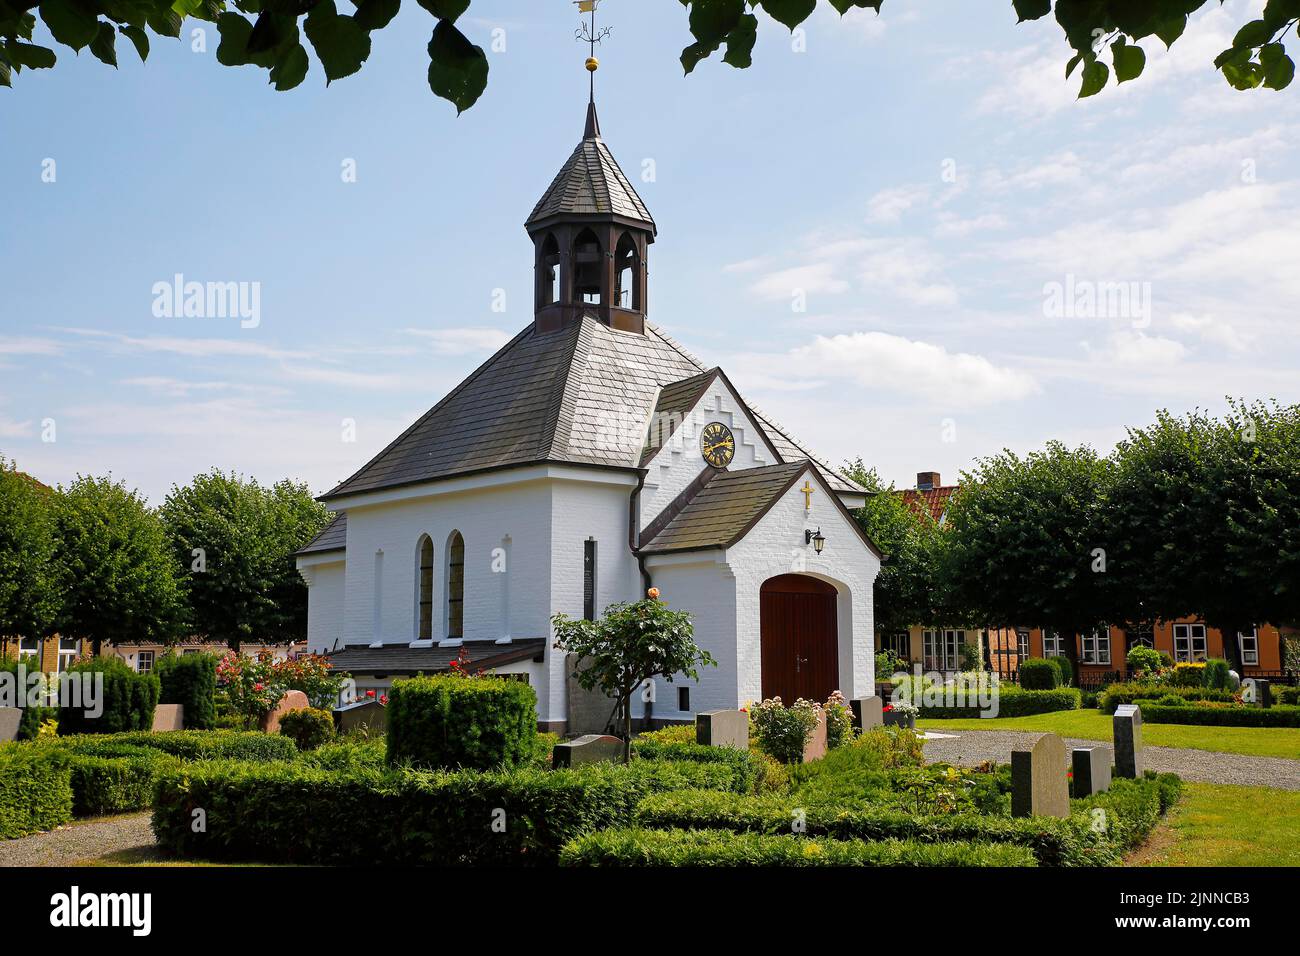 Cemetery chapel and cemetery, Historic fishing village Holm, Schleswig, Schleswig-Holstein, Germany Stock Photo